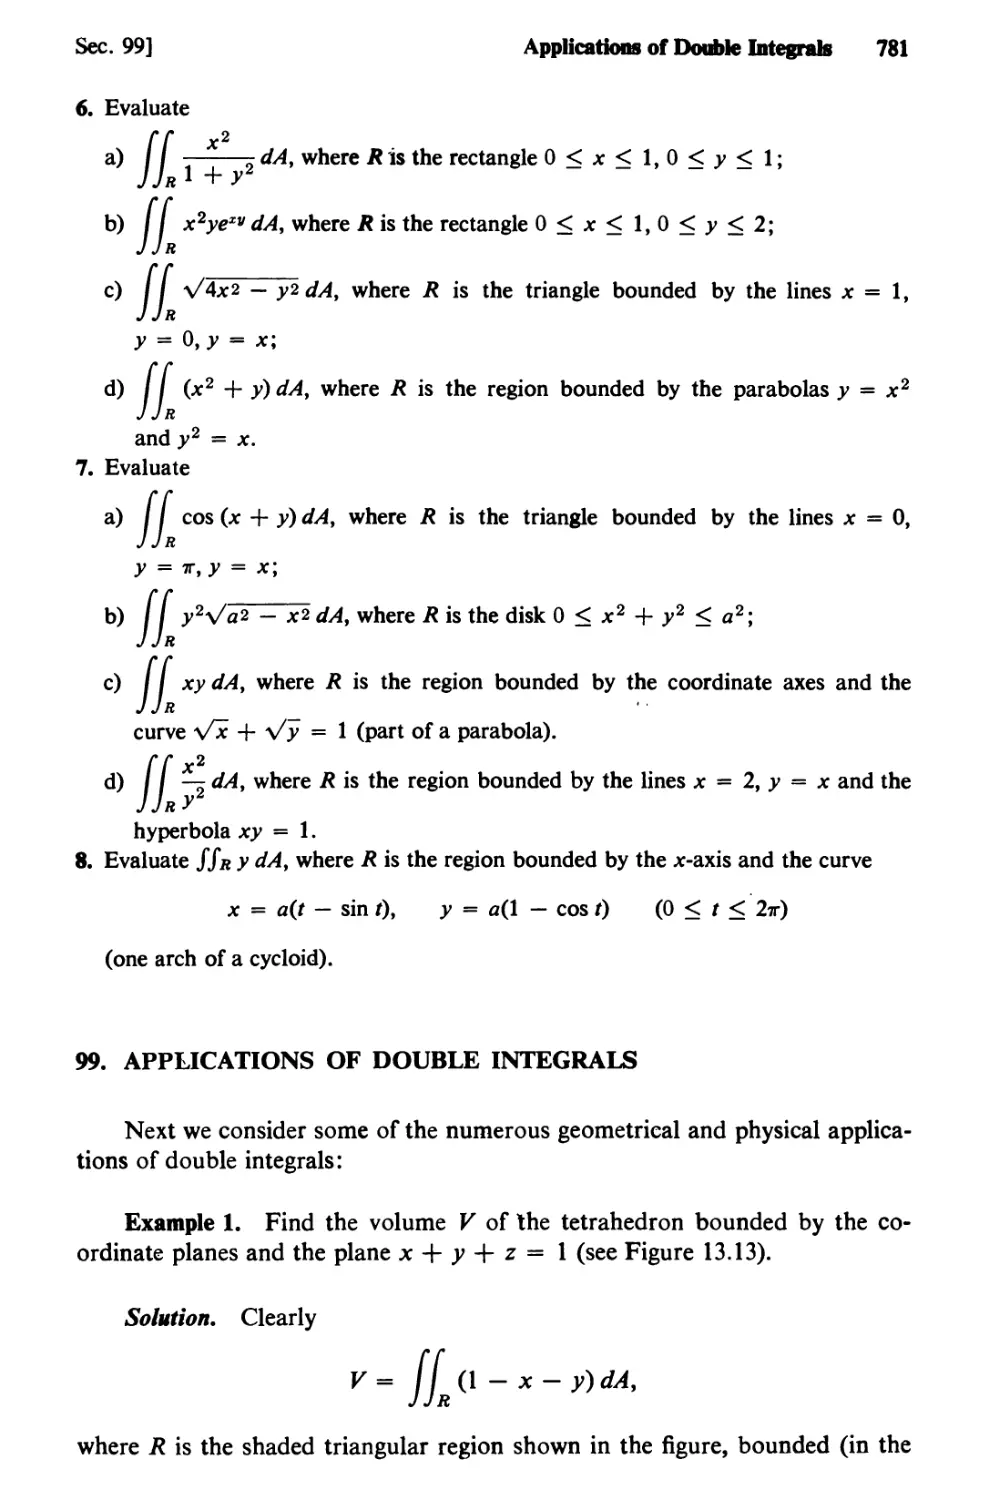 99. Applications of Double Integrals